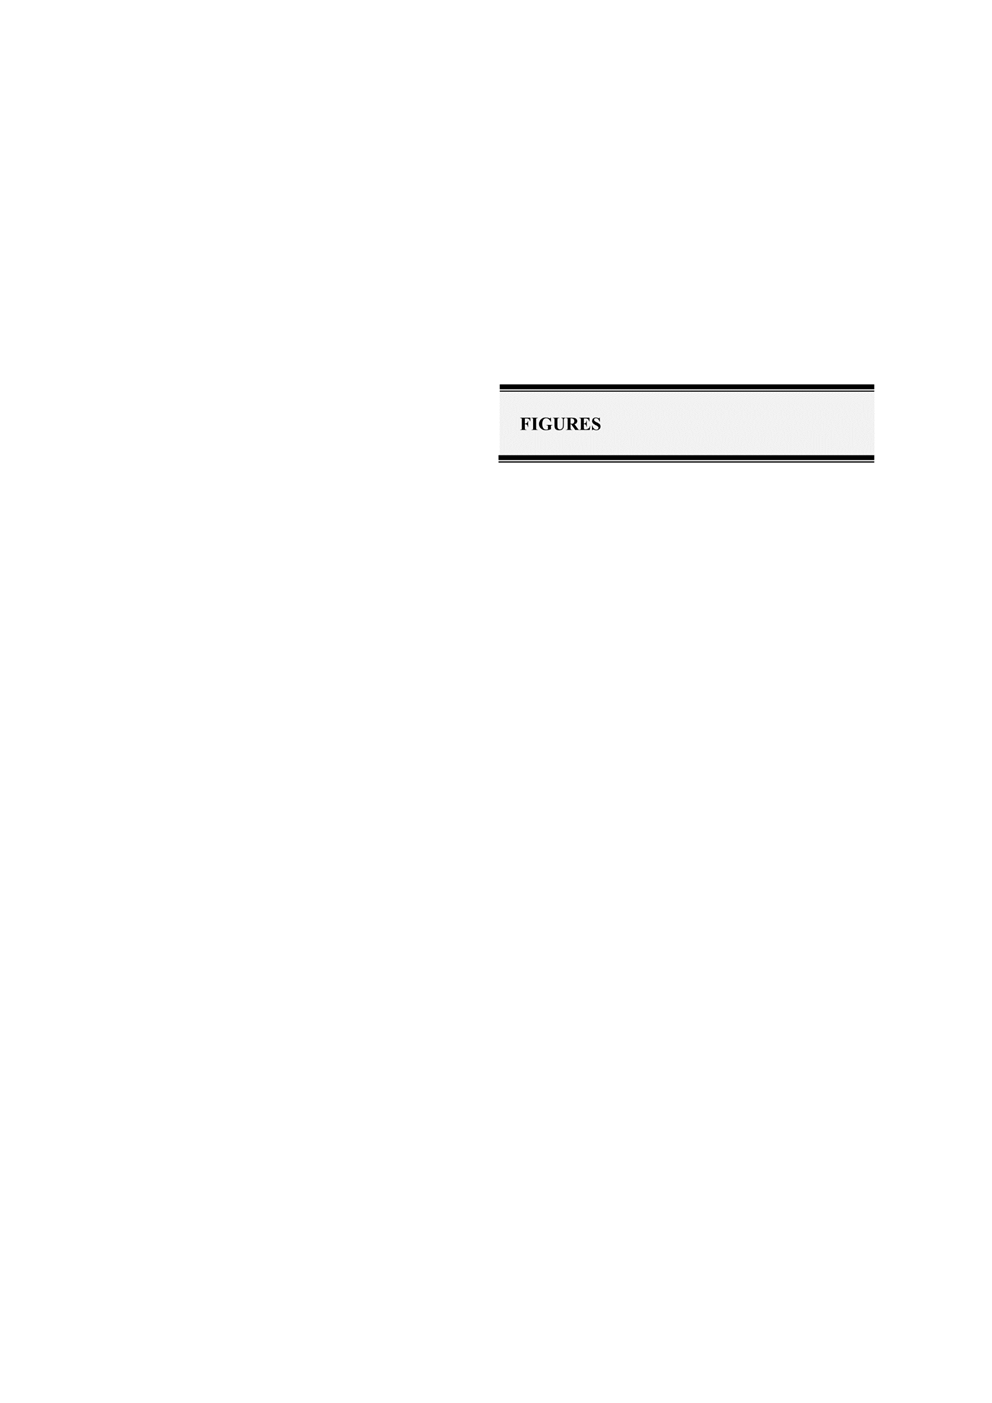 A white background with black text

Description automatically generated